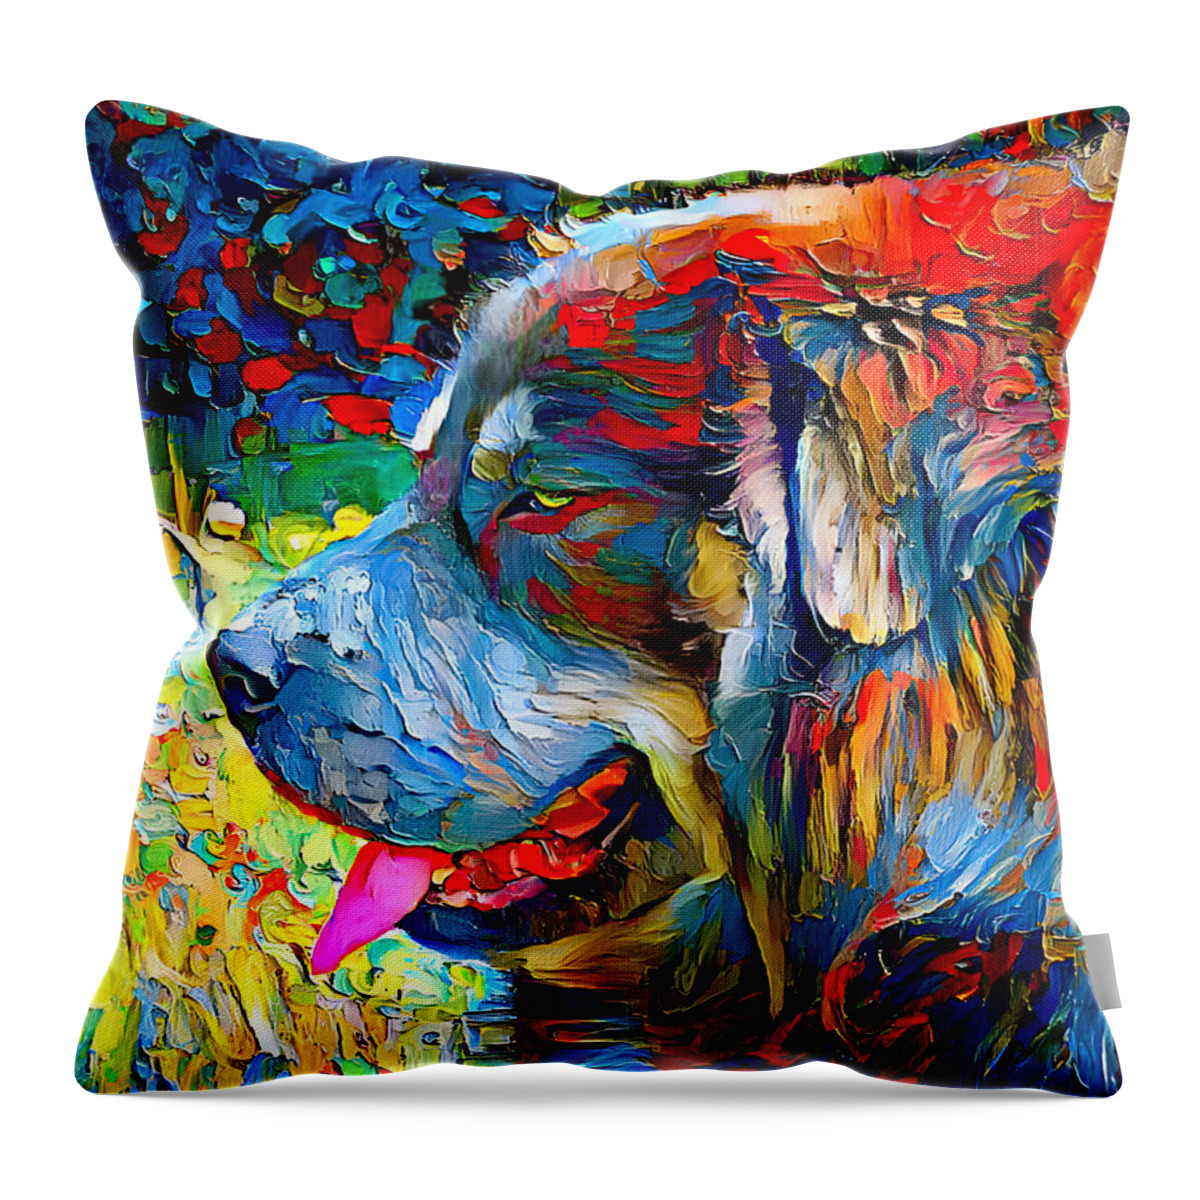 Tibetan Mastiff Throw Pillow featuring the digital art Tibetan Mastiff dog sitting profile with its mouth open - colorful palette knife oil texture by Nicko Prints